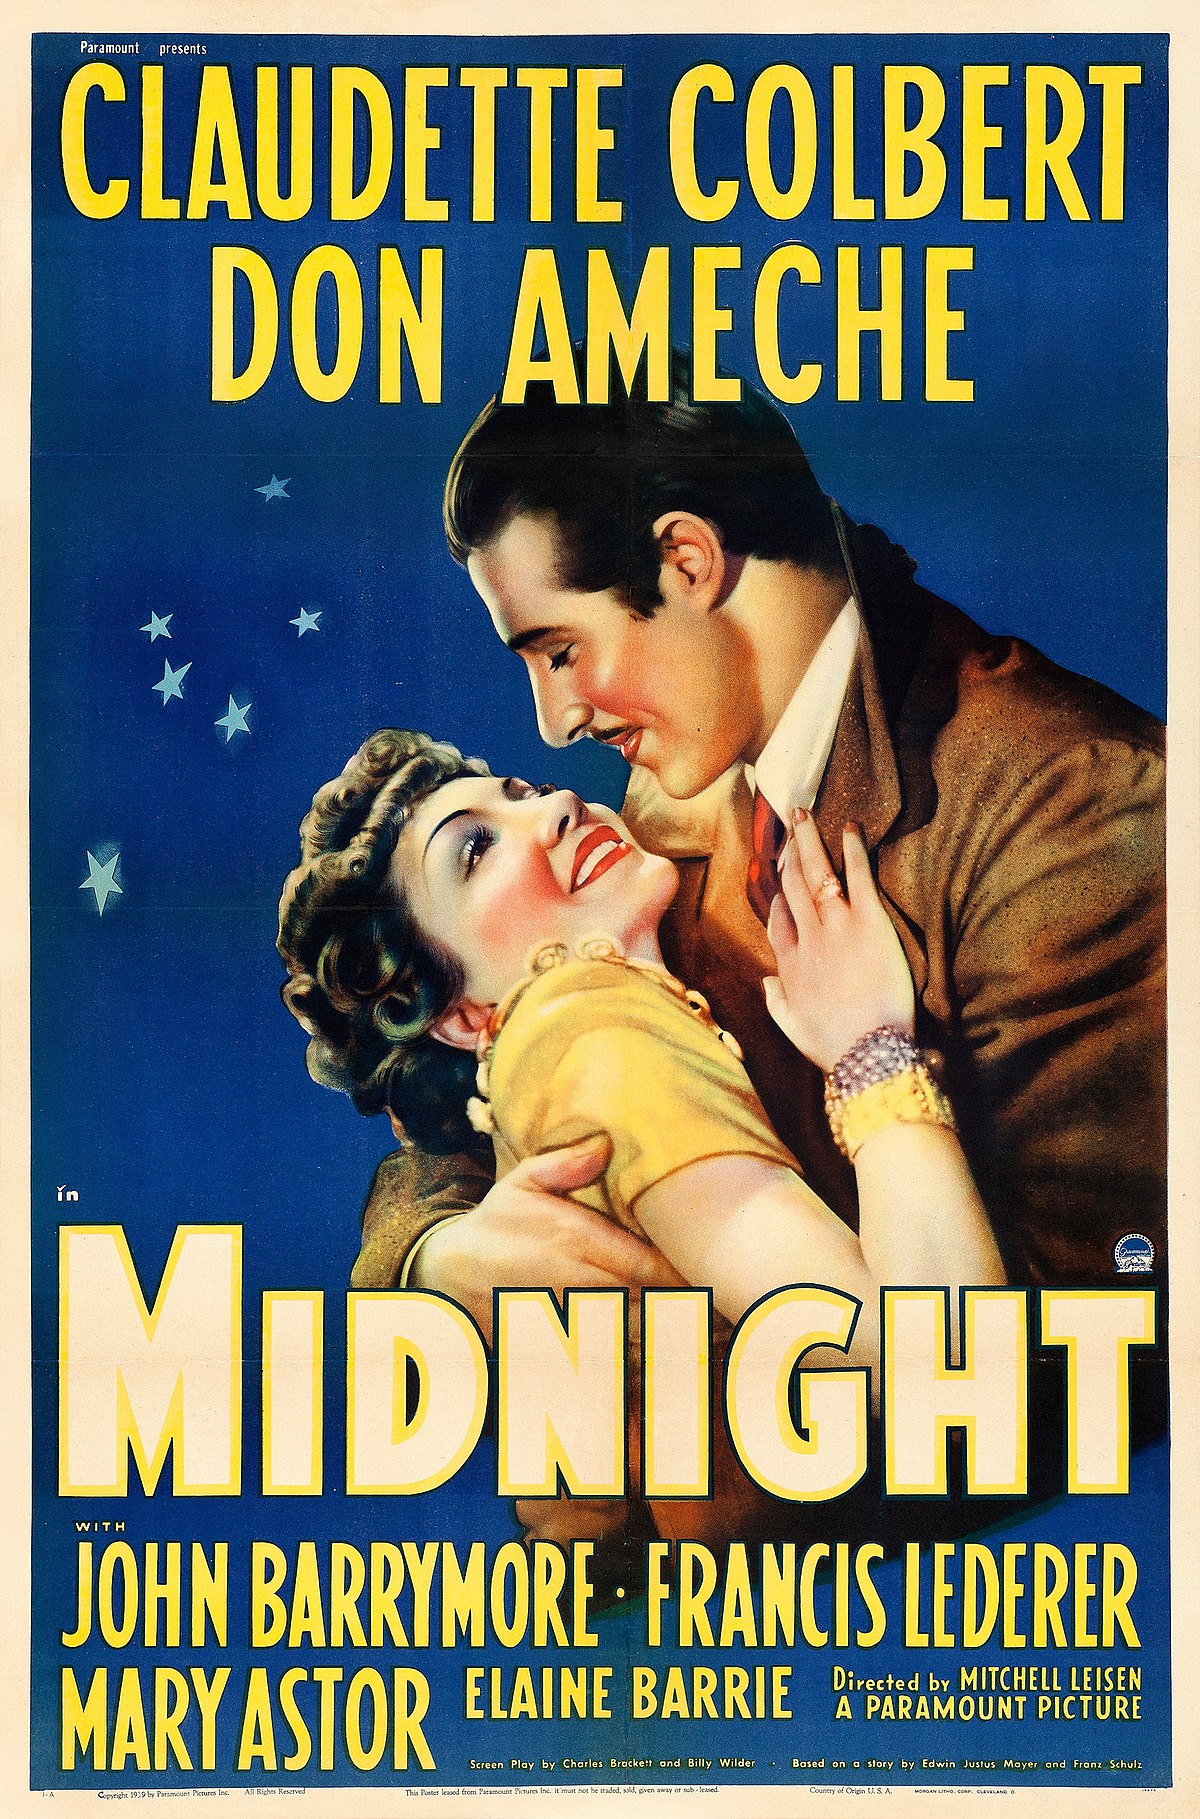 Movie poster for Midnight movie. Claudette Colbert and Don Ameche name in yellow at top. Man holding female while she is gazing at him against blue background. Midnight title is in yellow in the front. JOHN BARRYMORE: FRANCIS LEDERER MARY ASTOR ELAINE BARRIE is written in yellow underneath the Midnight title. 